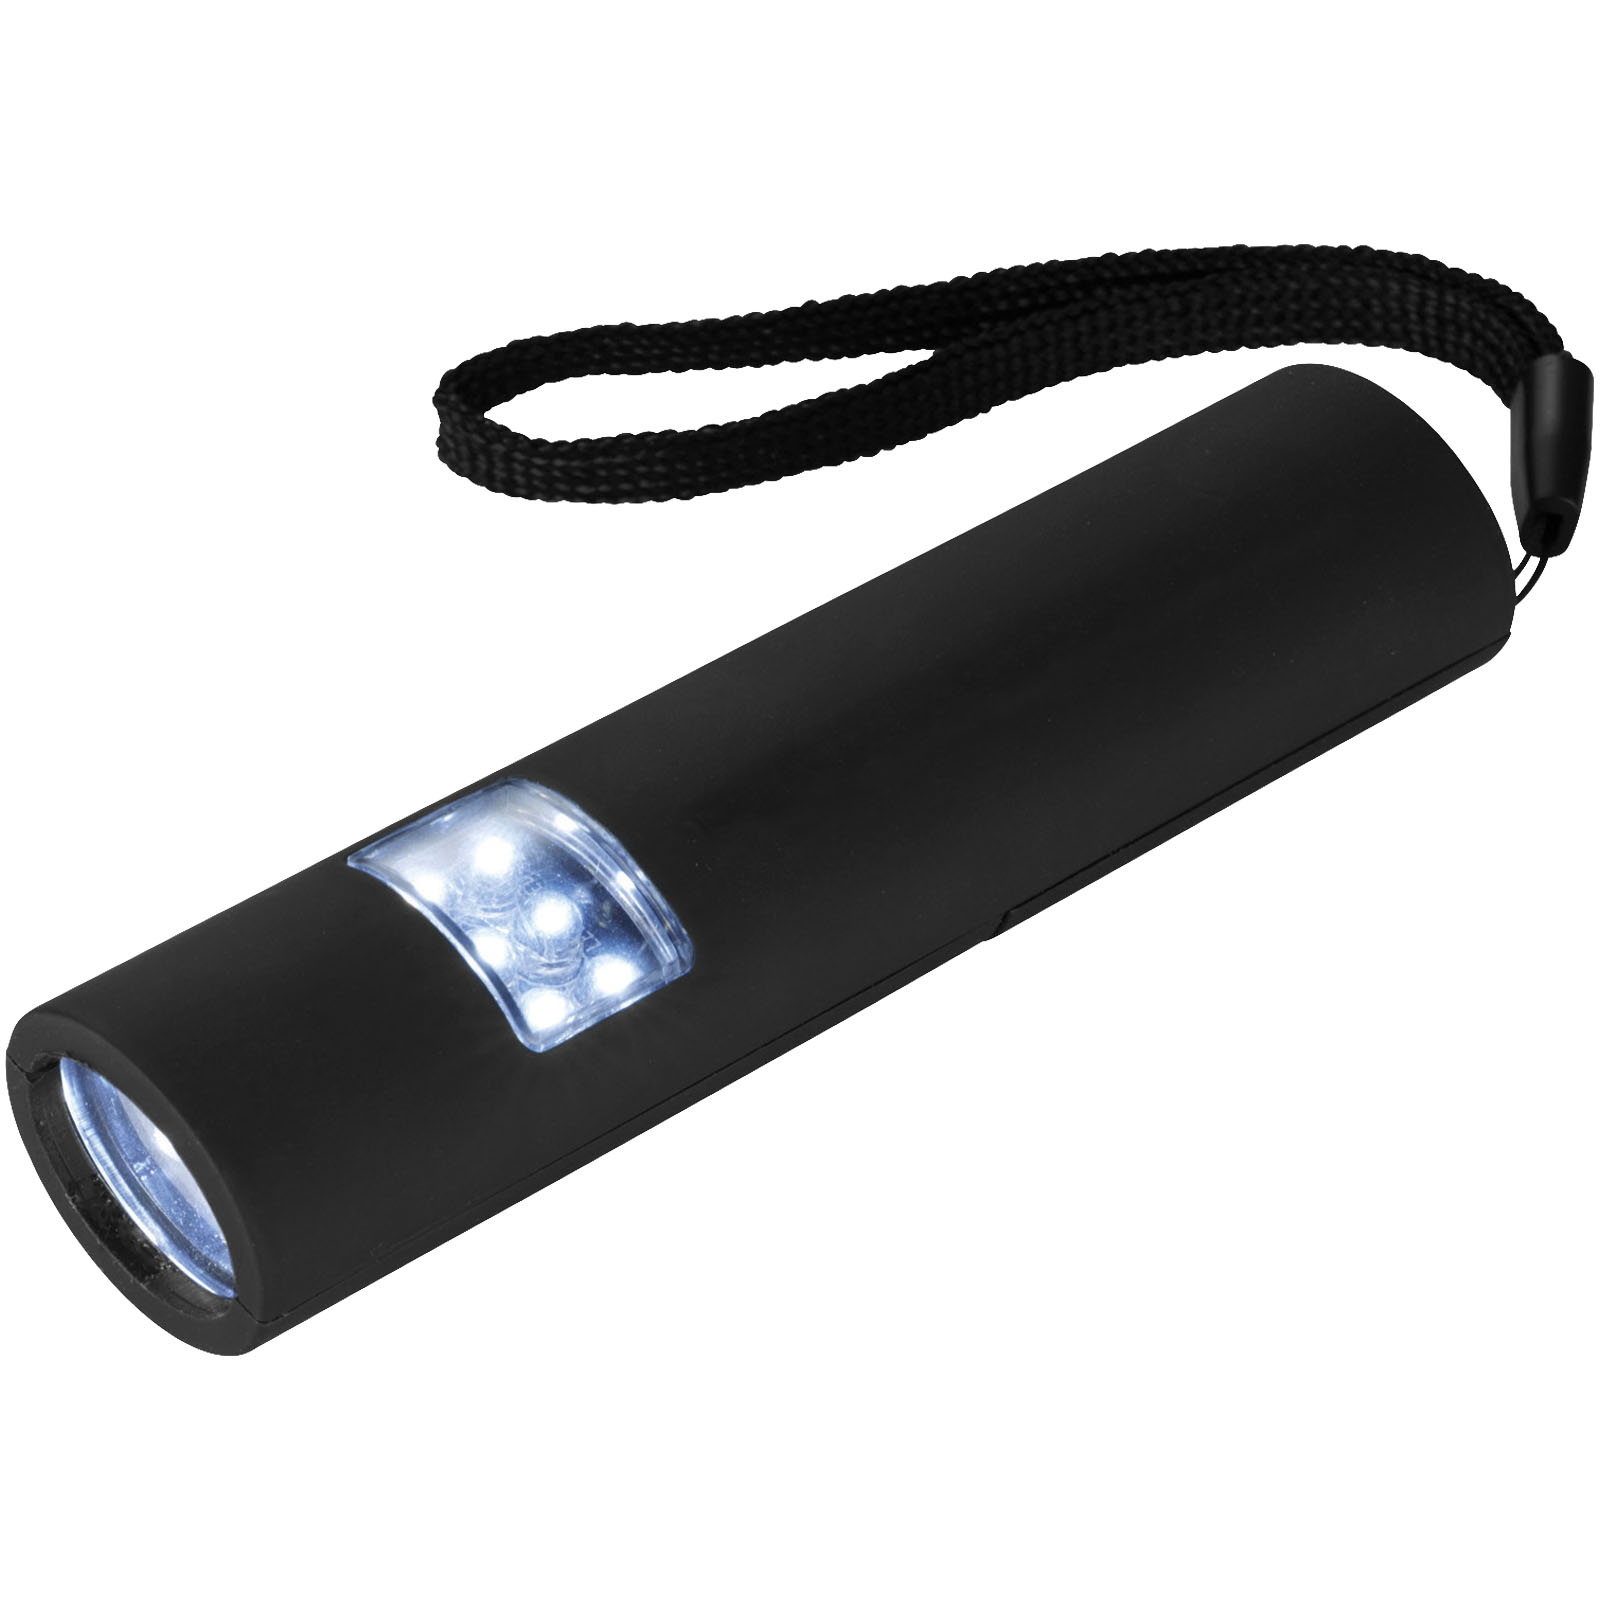 Tools & Car Accessories - Mini-grip LED magnetic torch light